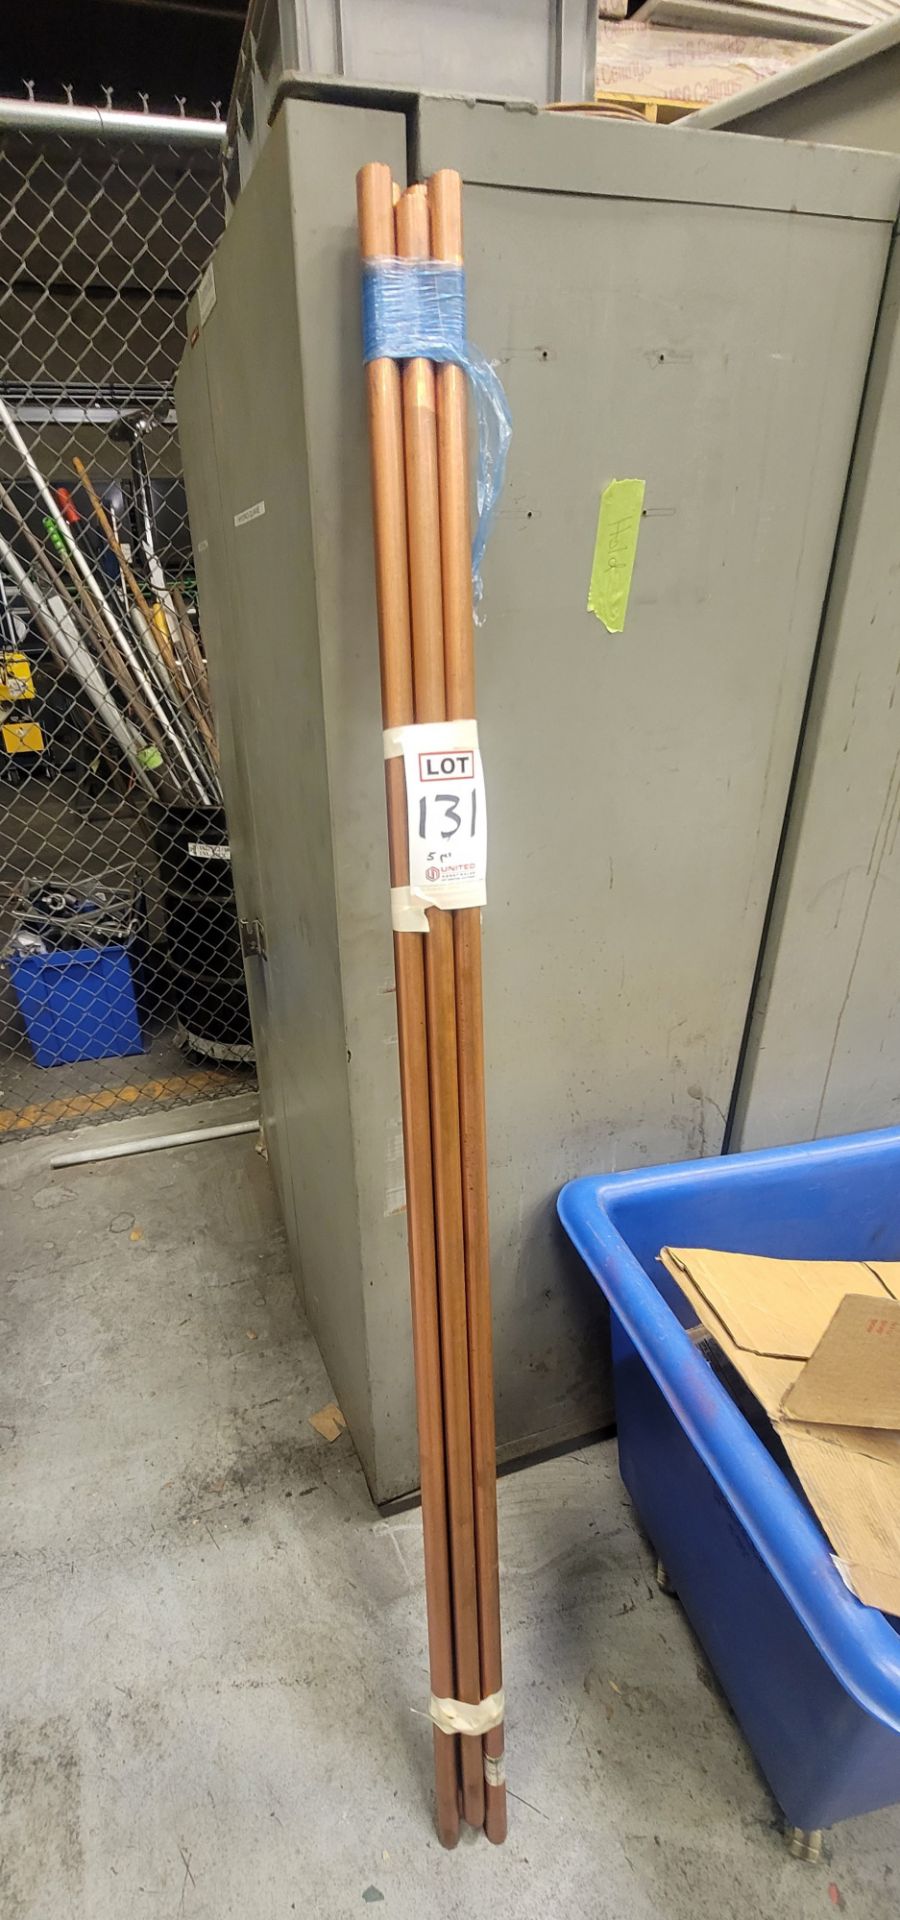 LOT - (5) 1" X 6' COPPER PIPES (LOCATION: MAINTENANCE WH)